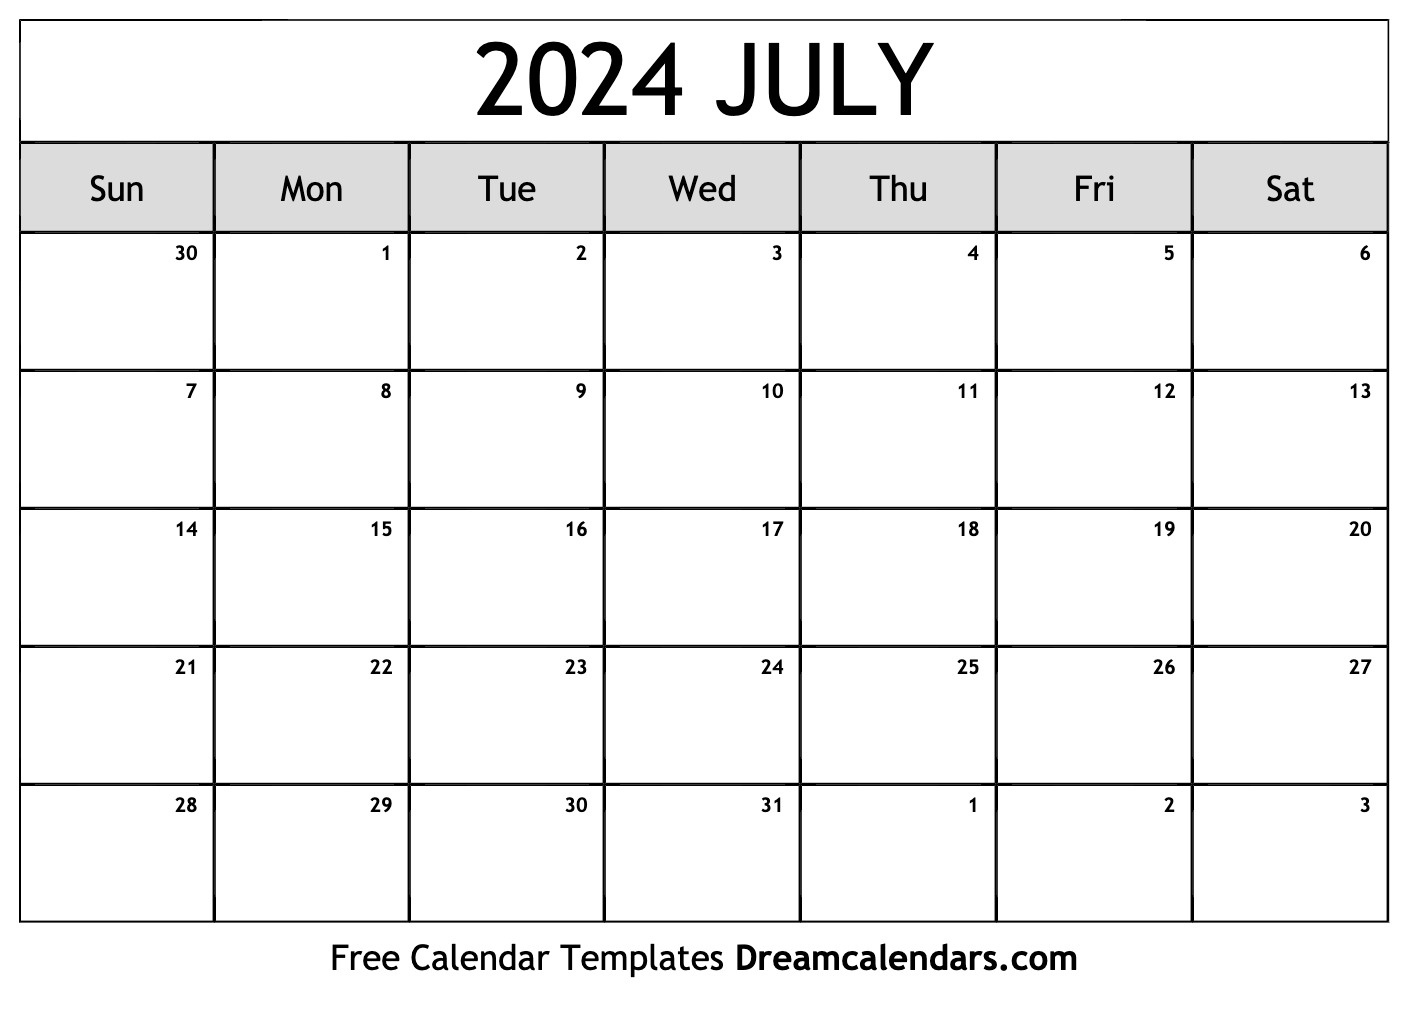 July 2024 Calendar - Free Printable With Holidays And Observances inside 15 Month Calendar Starting July 2024